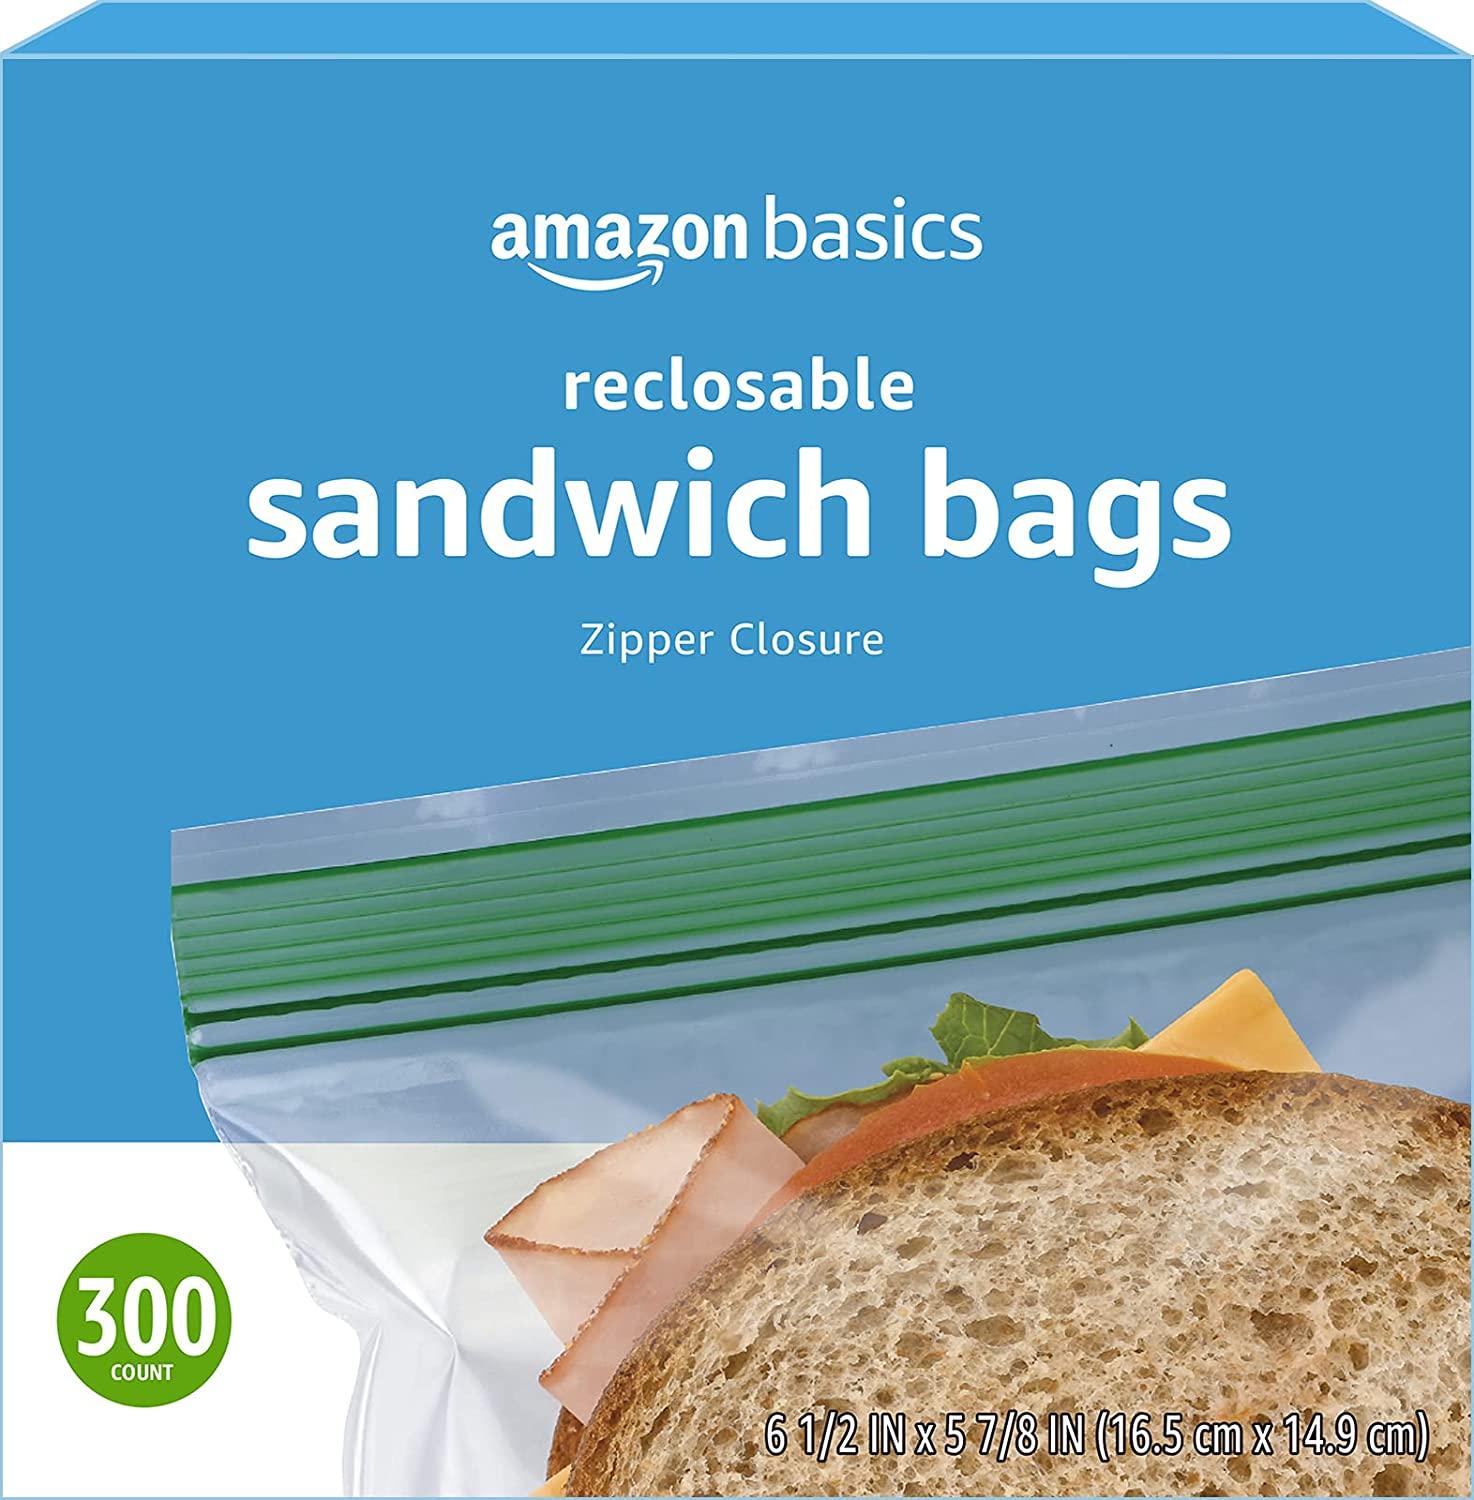   Basics Slider Gallon Food Storage Bags, 90 Count  (Previously Solimo) : Home & Kitchen